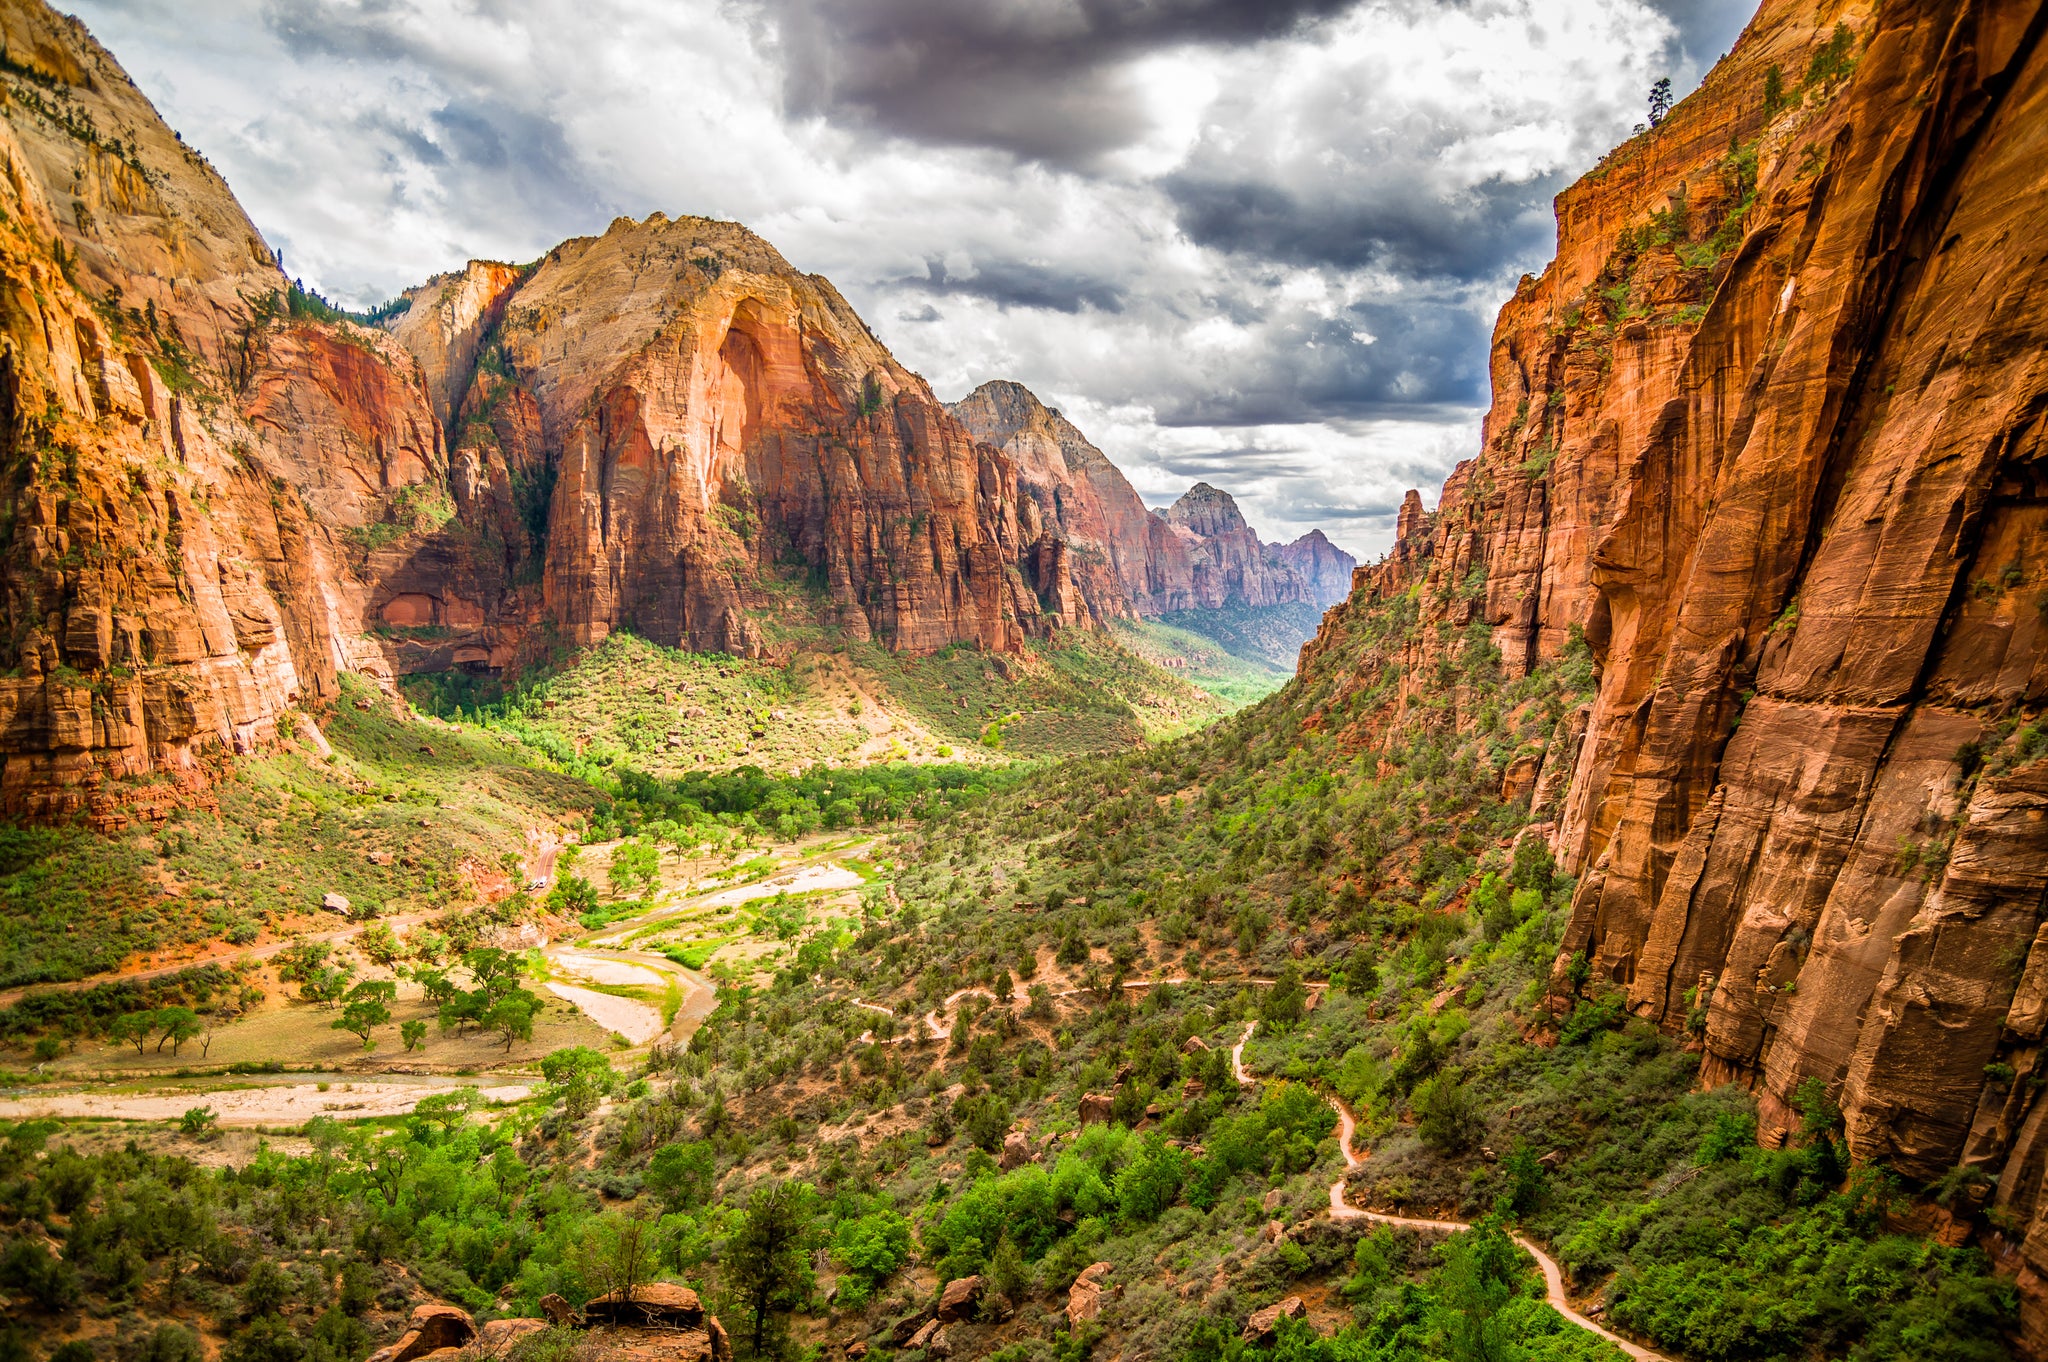 Zion's Irresistible Call: Five Reasons Why Your Next Trip Should Be to Zion National Park